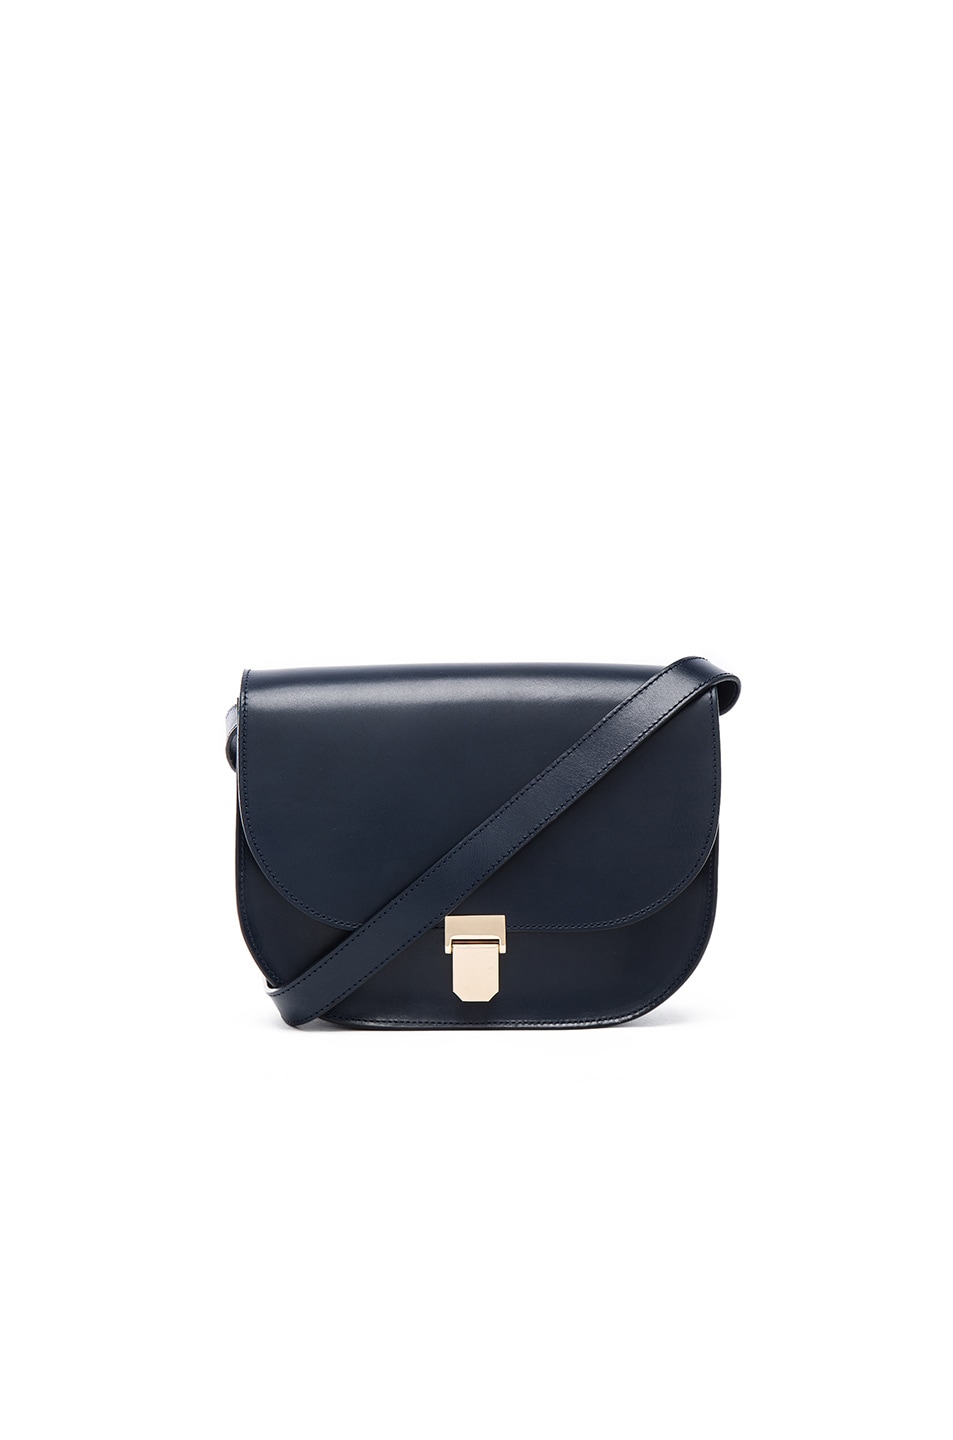 Image 1 of A.P.C. Vienne Bag in Marine